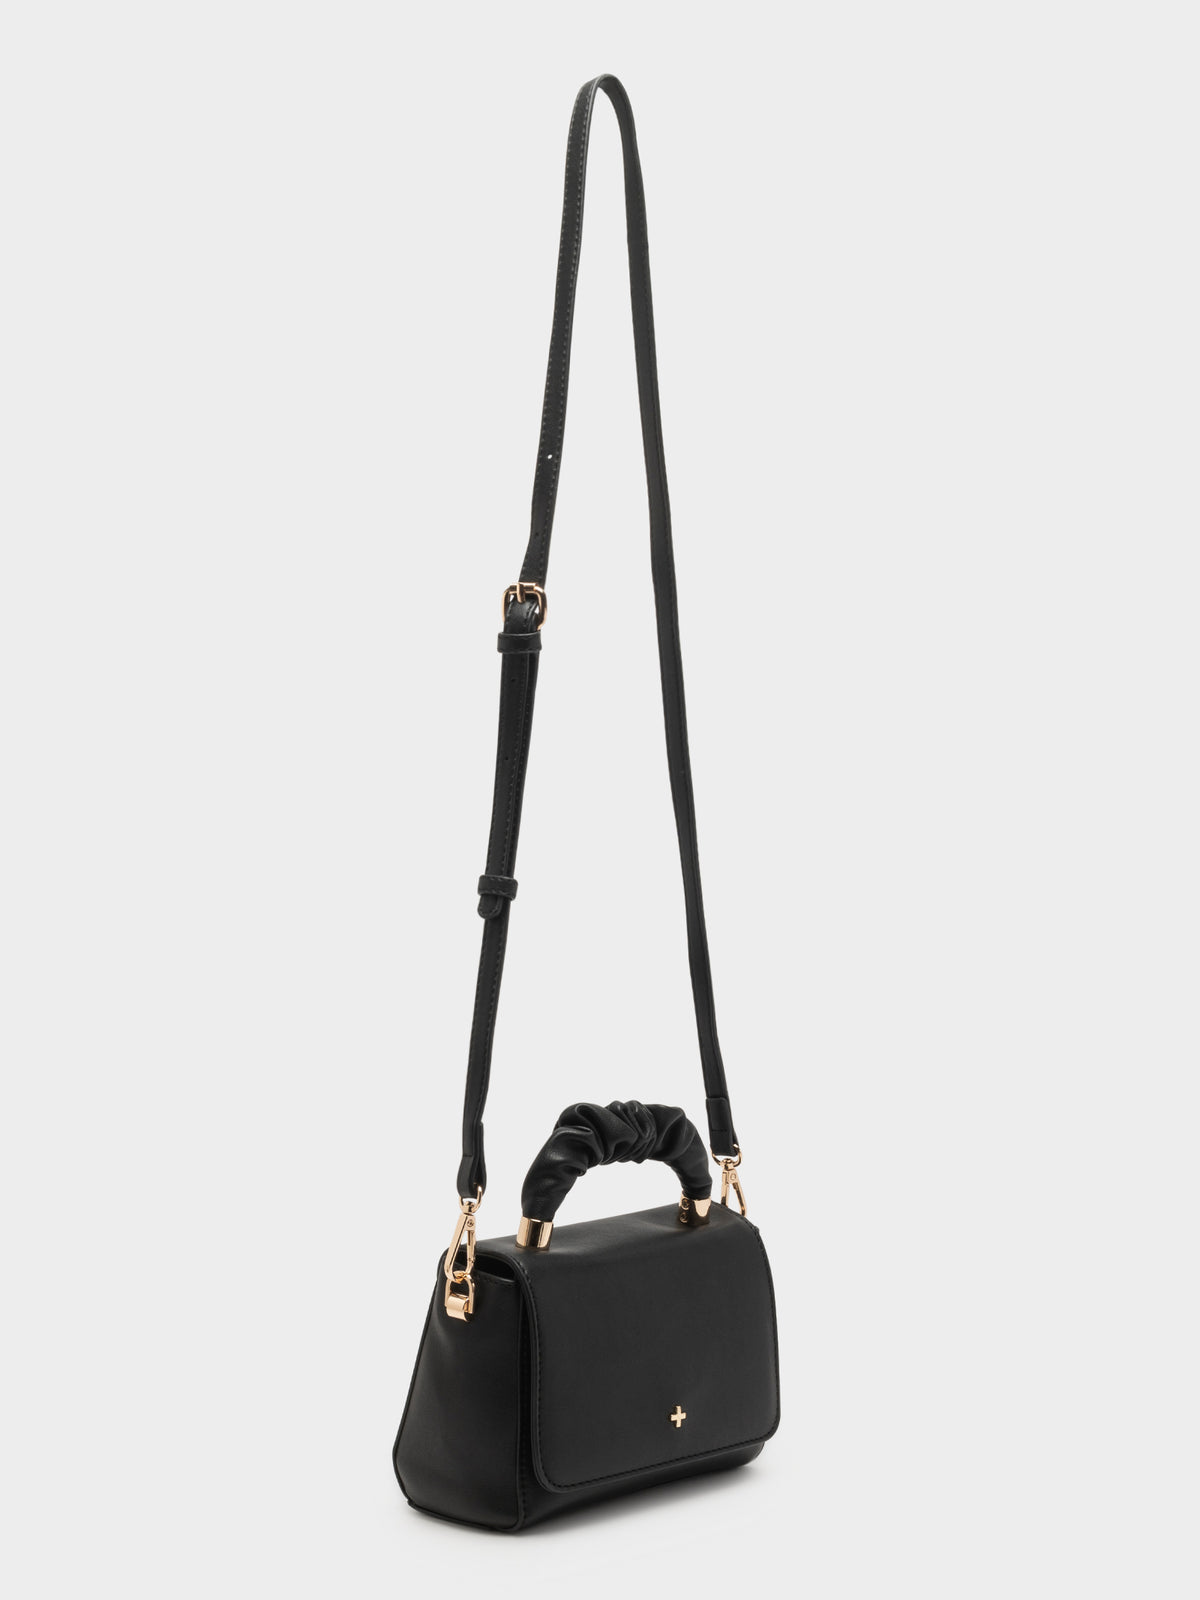 Kendall Gathered Bag in Black